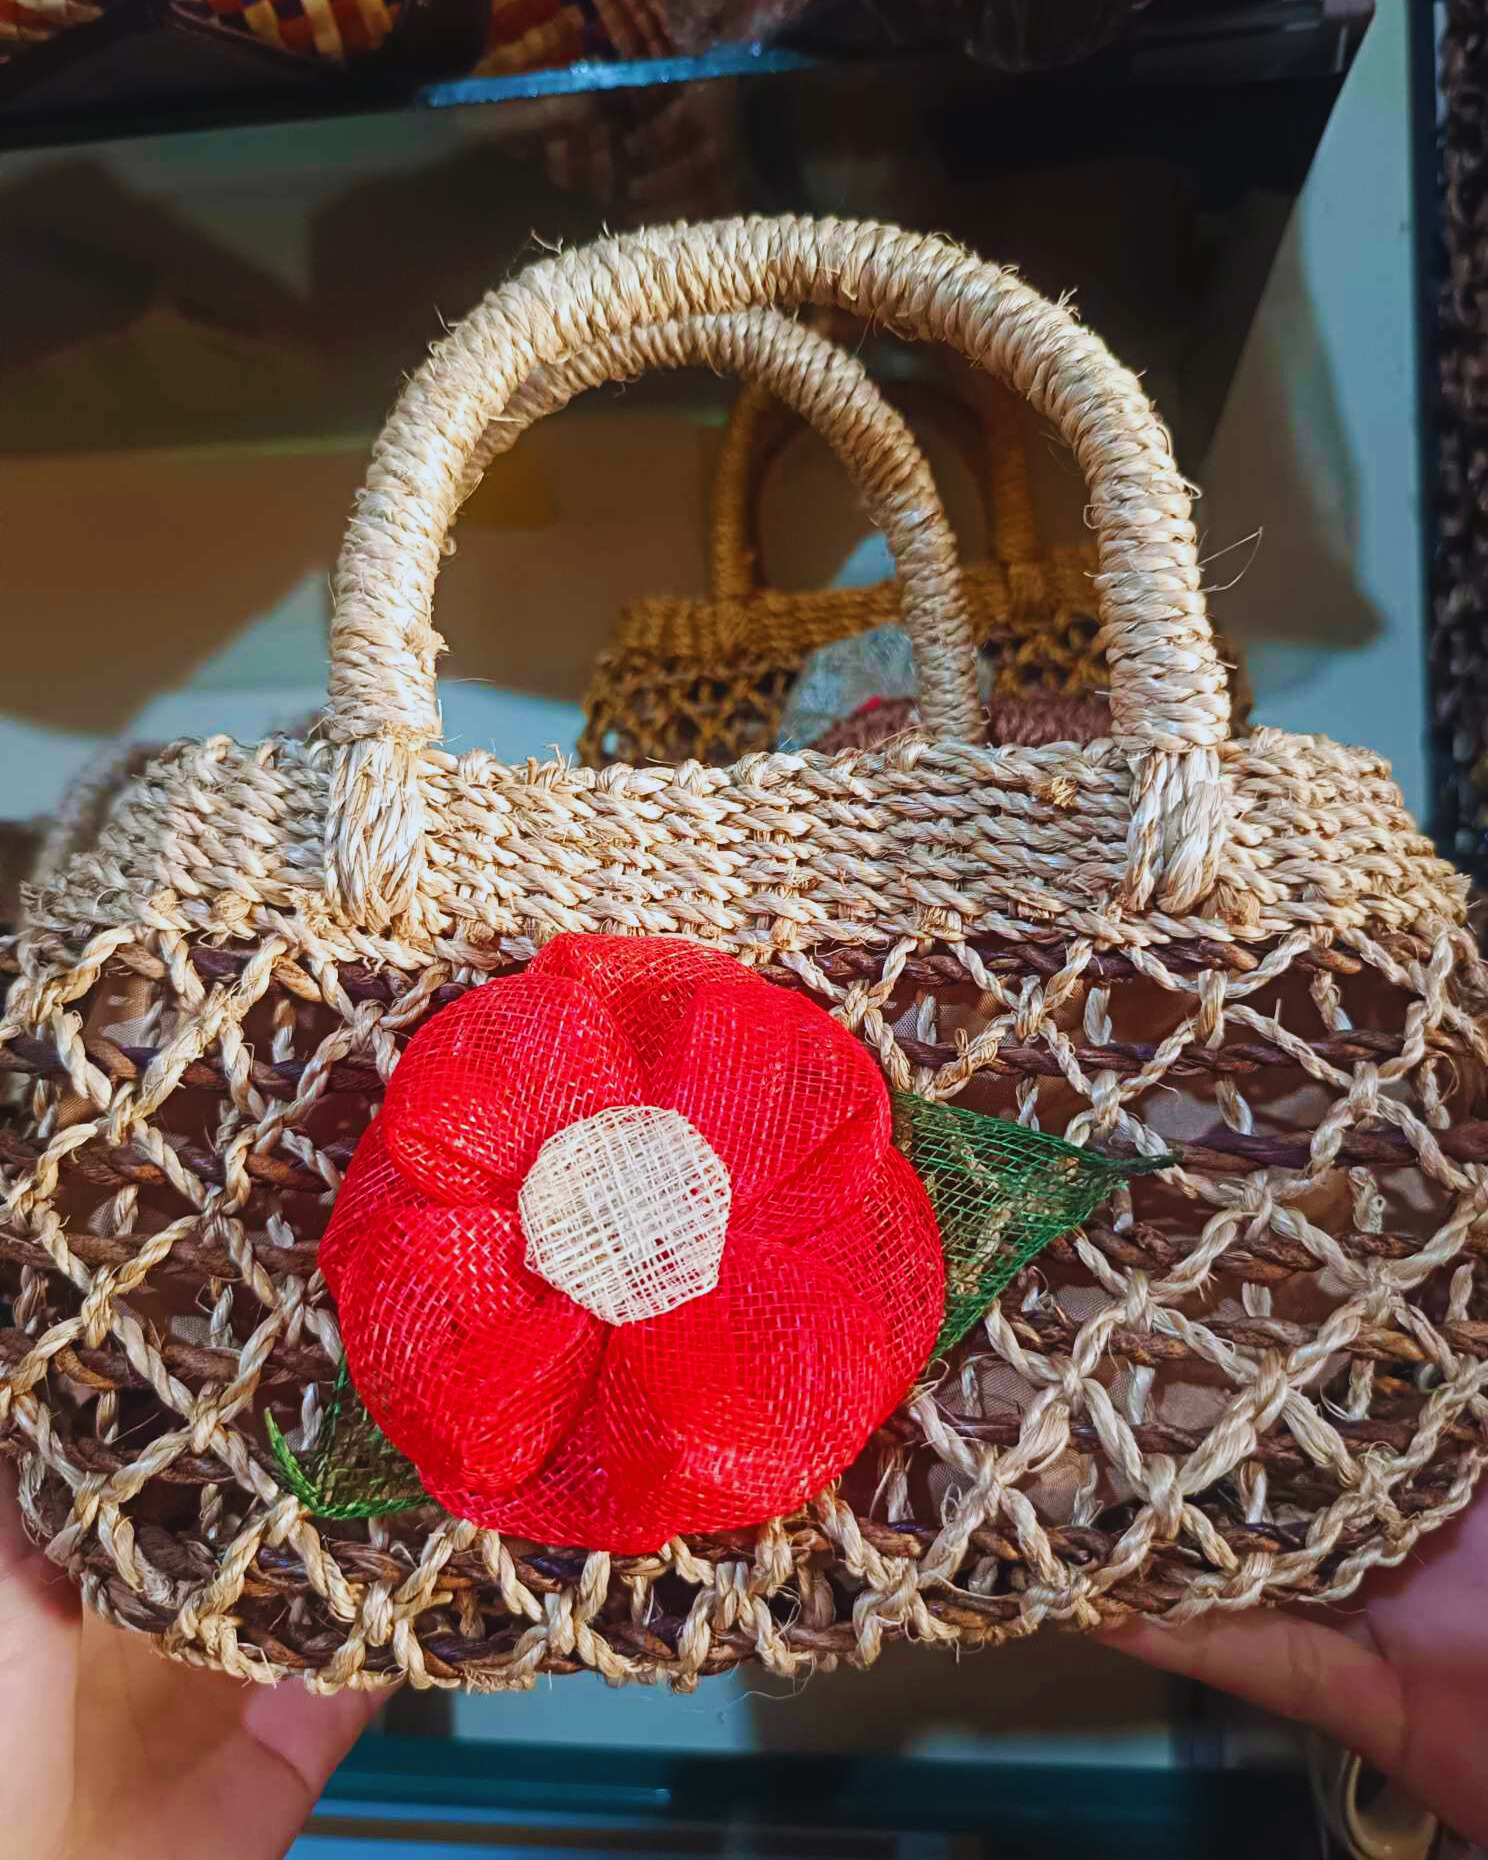 http://www.e-scs.shop/storage/photos/20/Products/Abaca Hand Bag.jpg